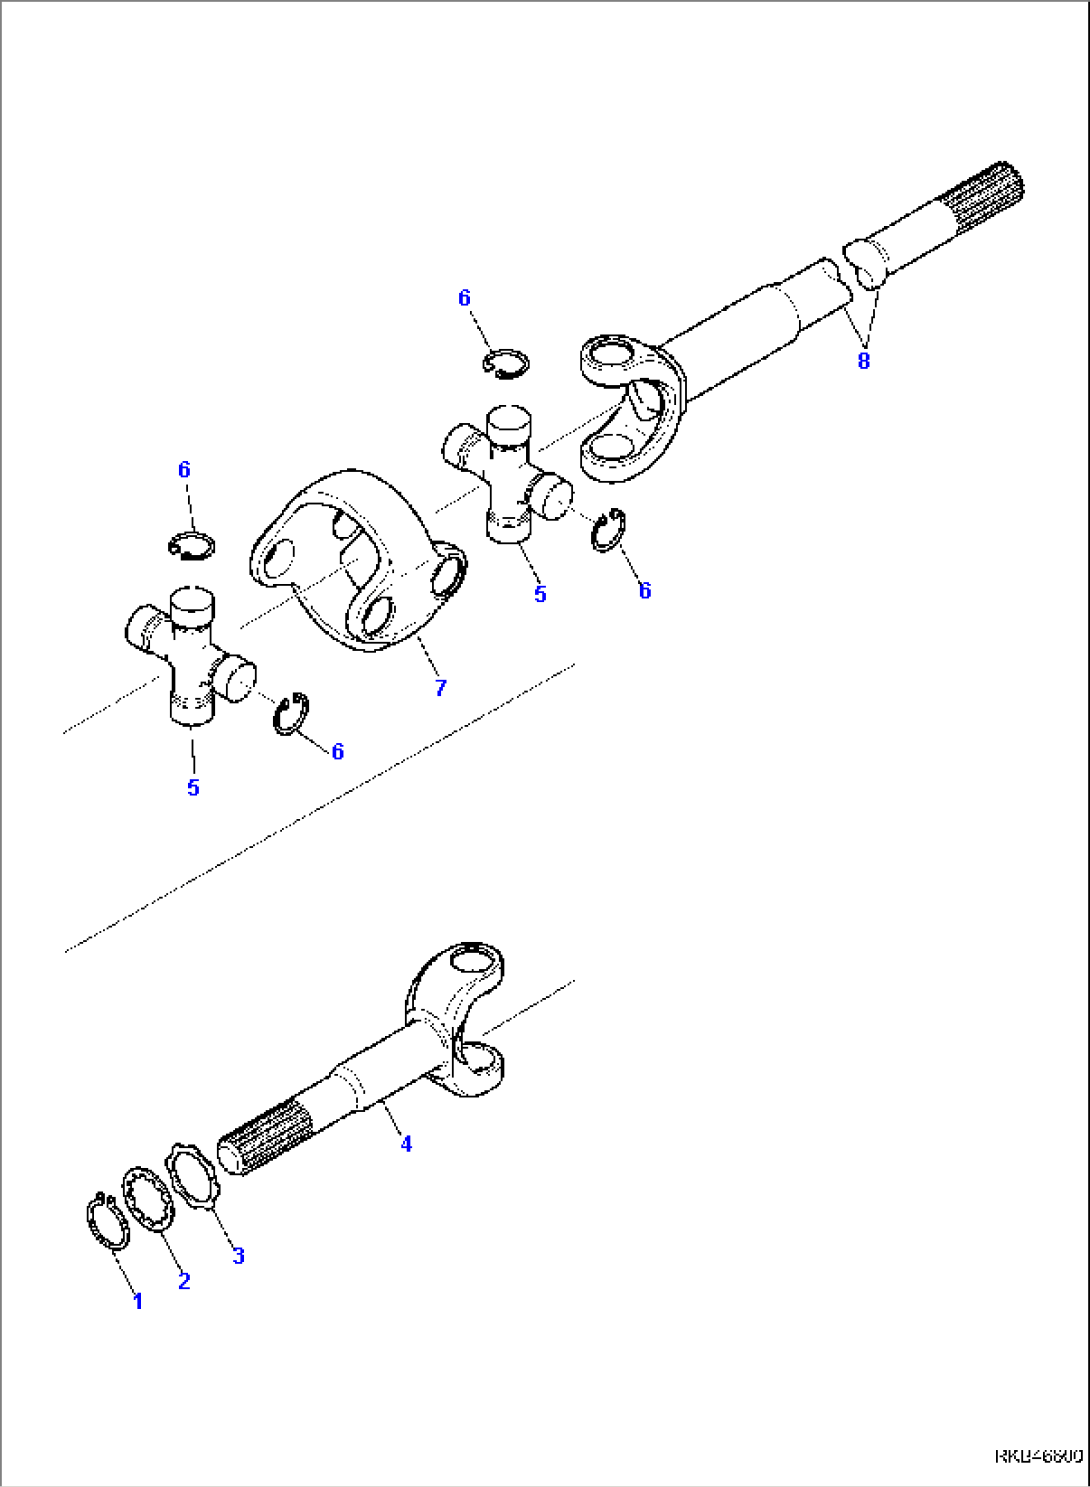 FRONT AXLE (5/7)